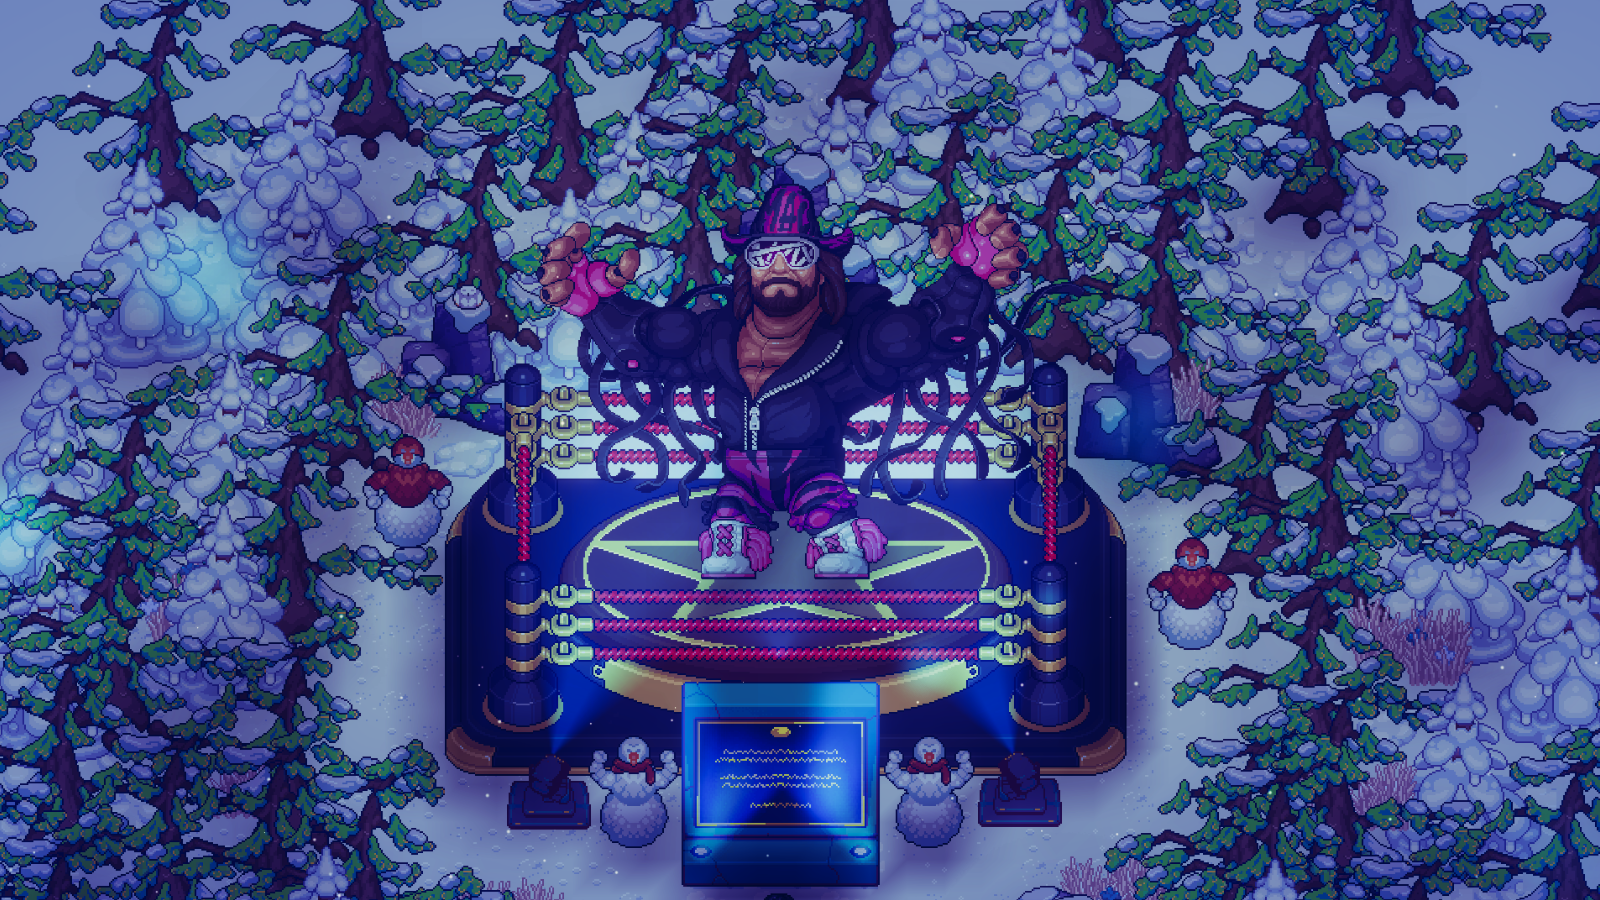 New trailer revealed for WrestleQuest video game